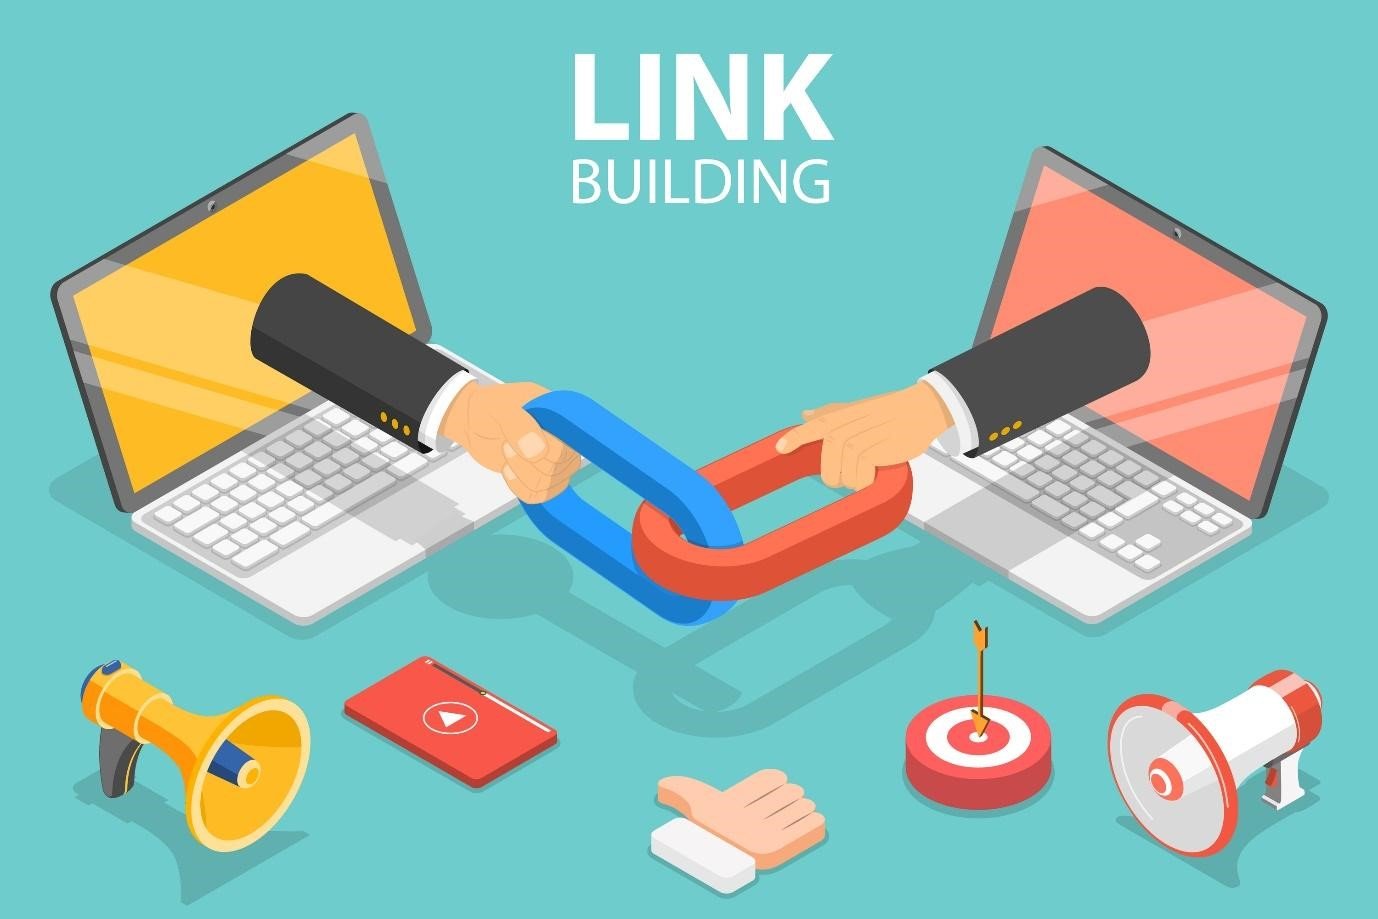 How Exactly Does Link Building Work?